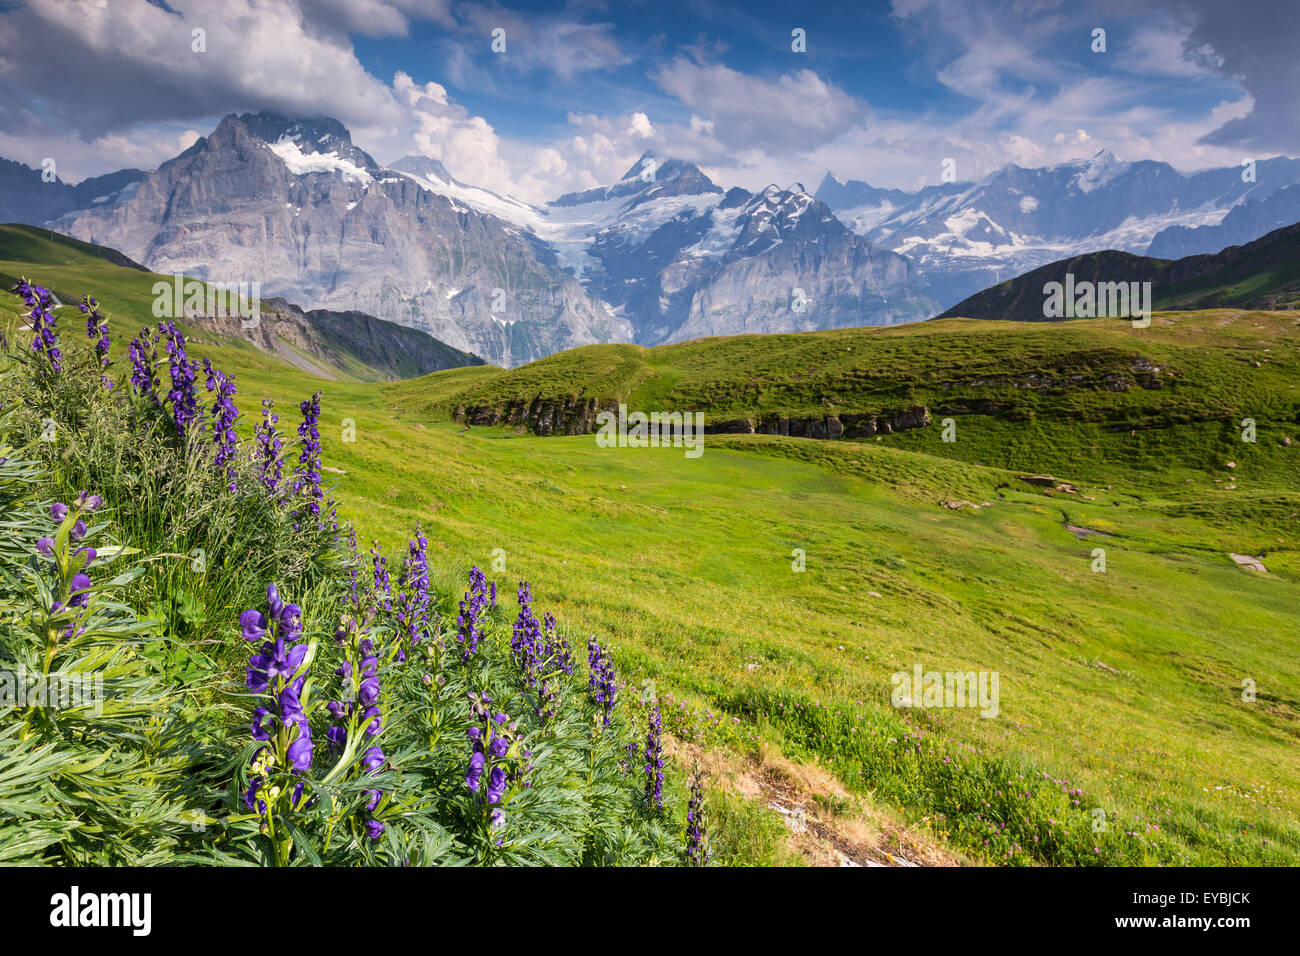 Aconitum napellus L. (aconito napello). Lycoctonum.   Alp Baach above Grindelwald town.  The Oberland mountain area. Switzerland Stock Photo